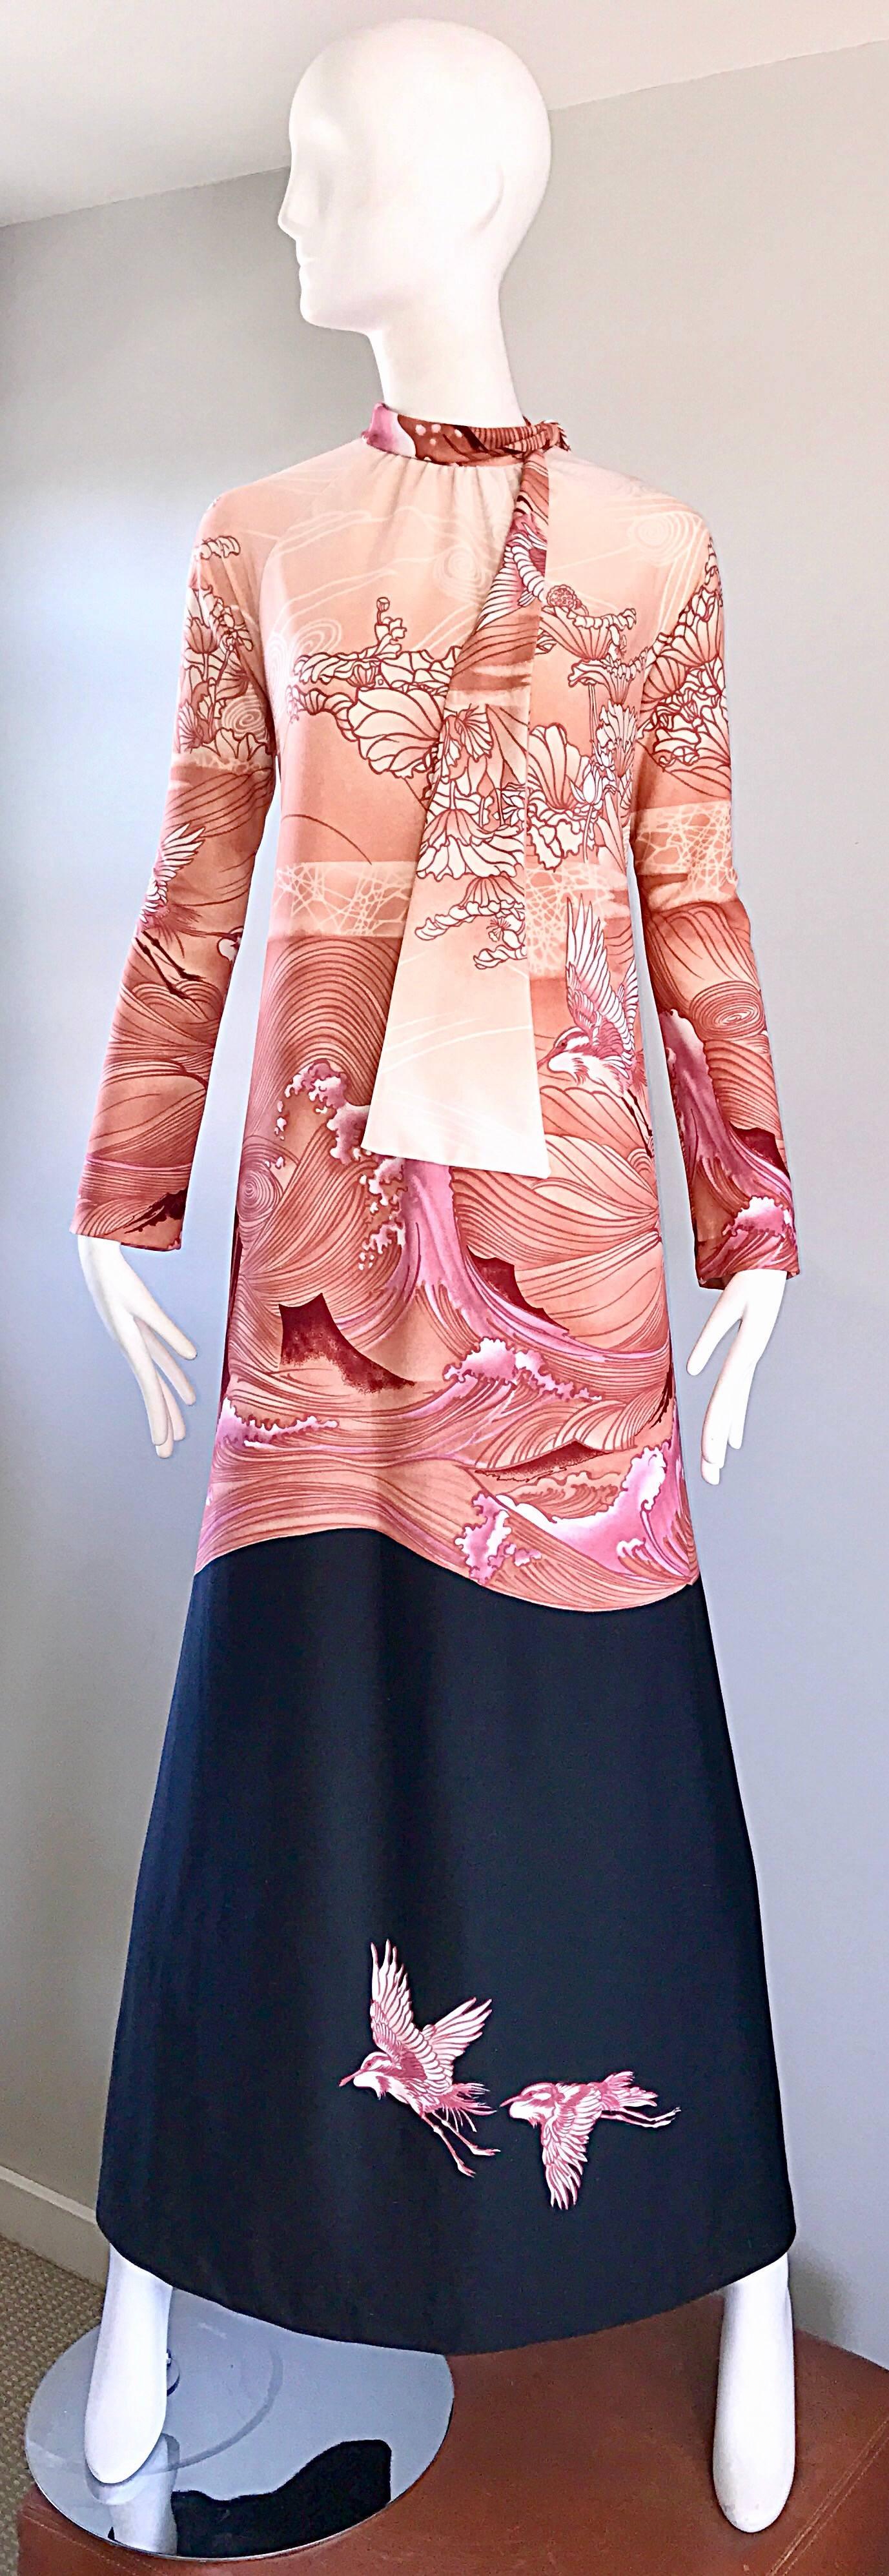 Rare 70s CHRISTIAN DIOR hiroshige wave gown / caftan! Inspired by Japanese Asian wood cuts, with cranes (birds) printed on the side bodice and the skirt. Warm hues of pink, coral, white and black. Attached scarf can be worn down or tied into a